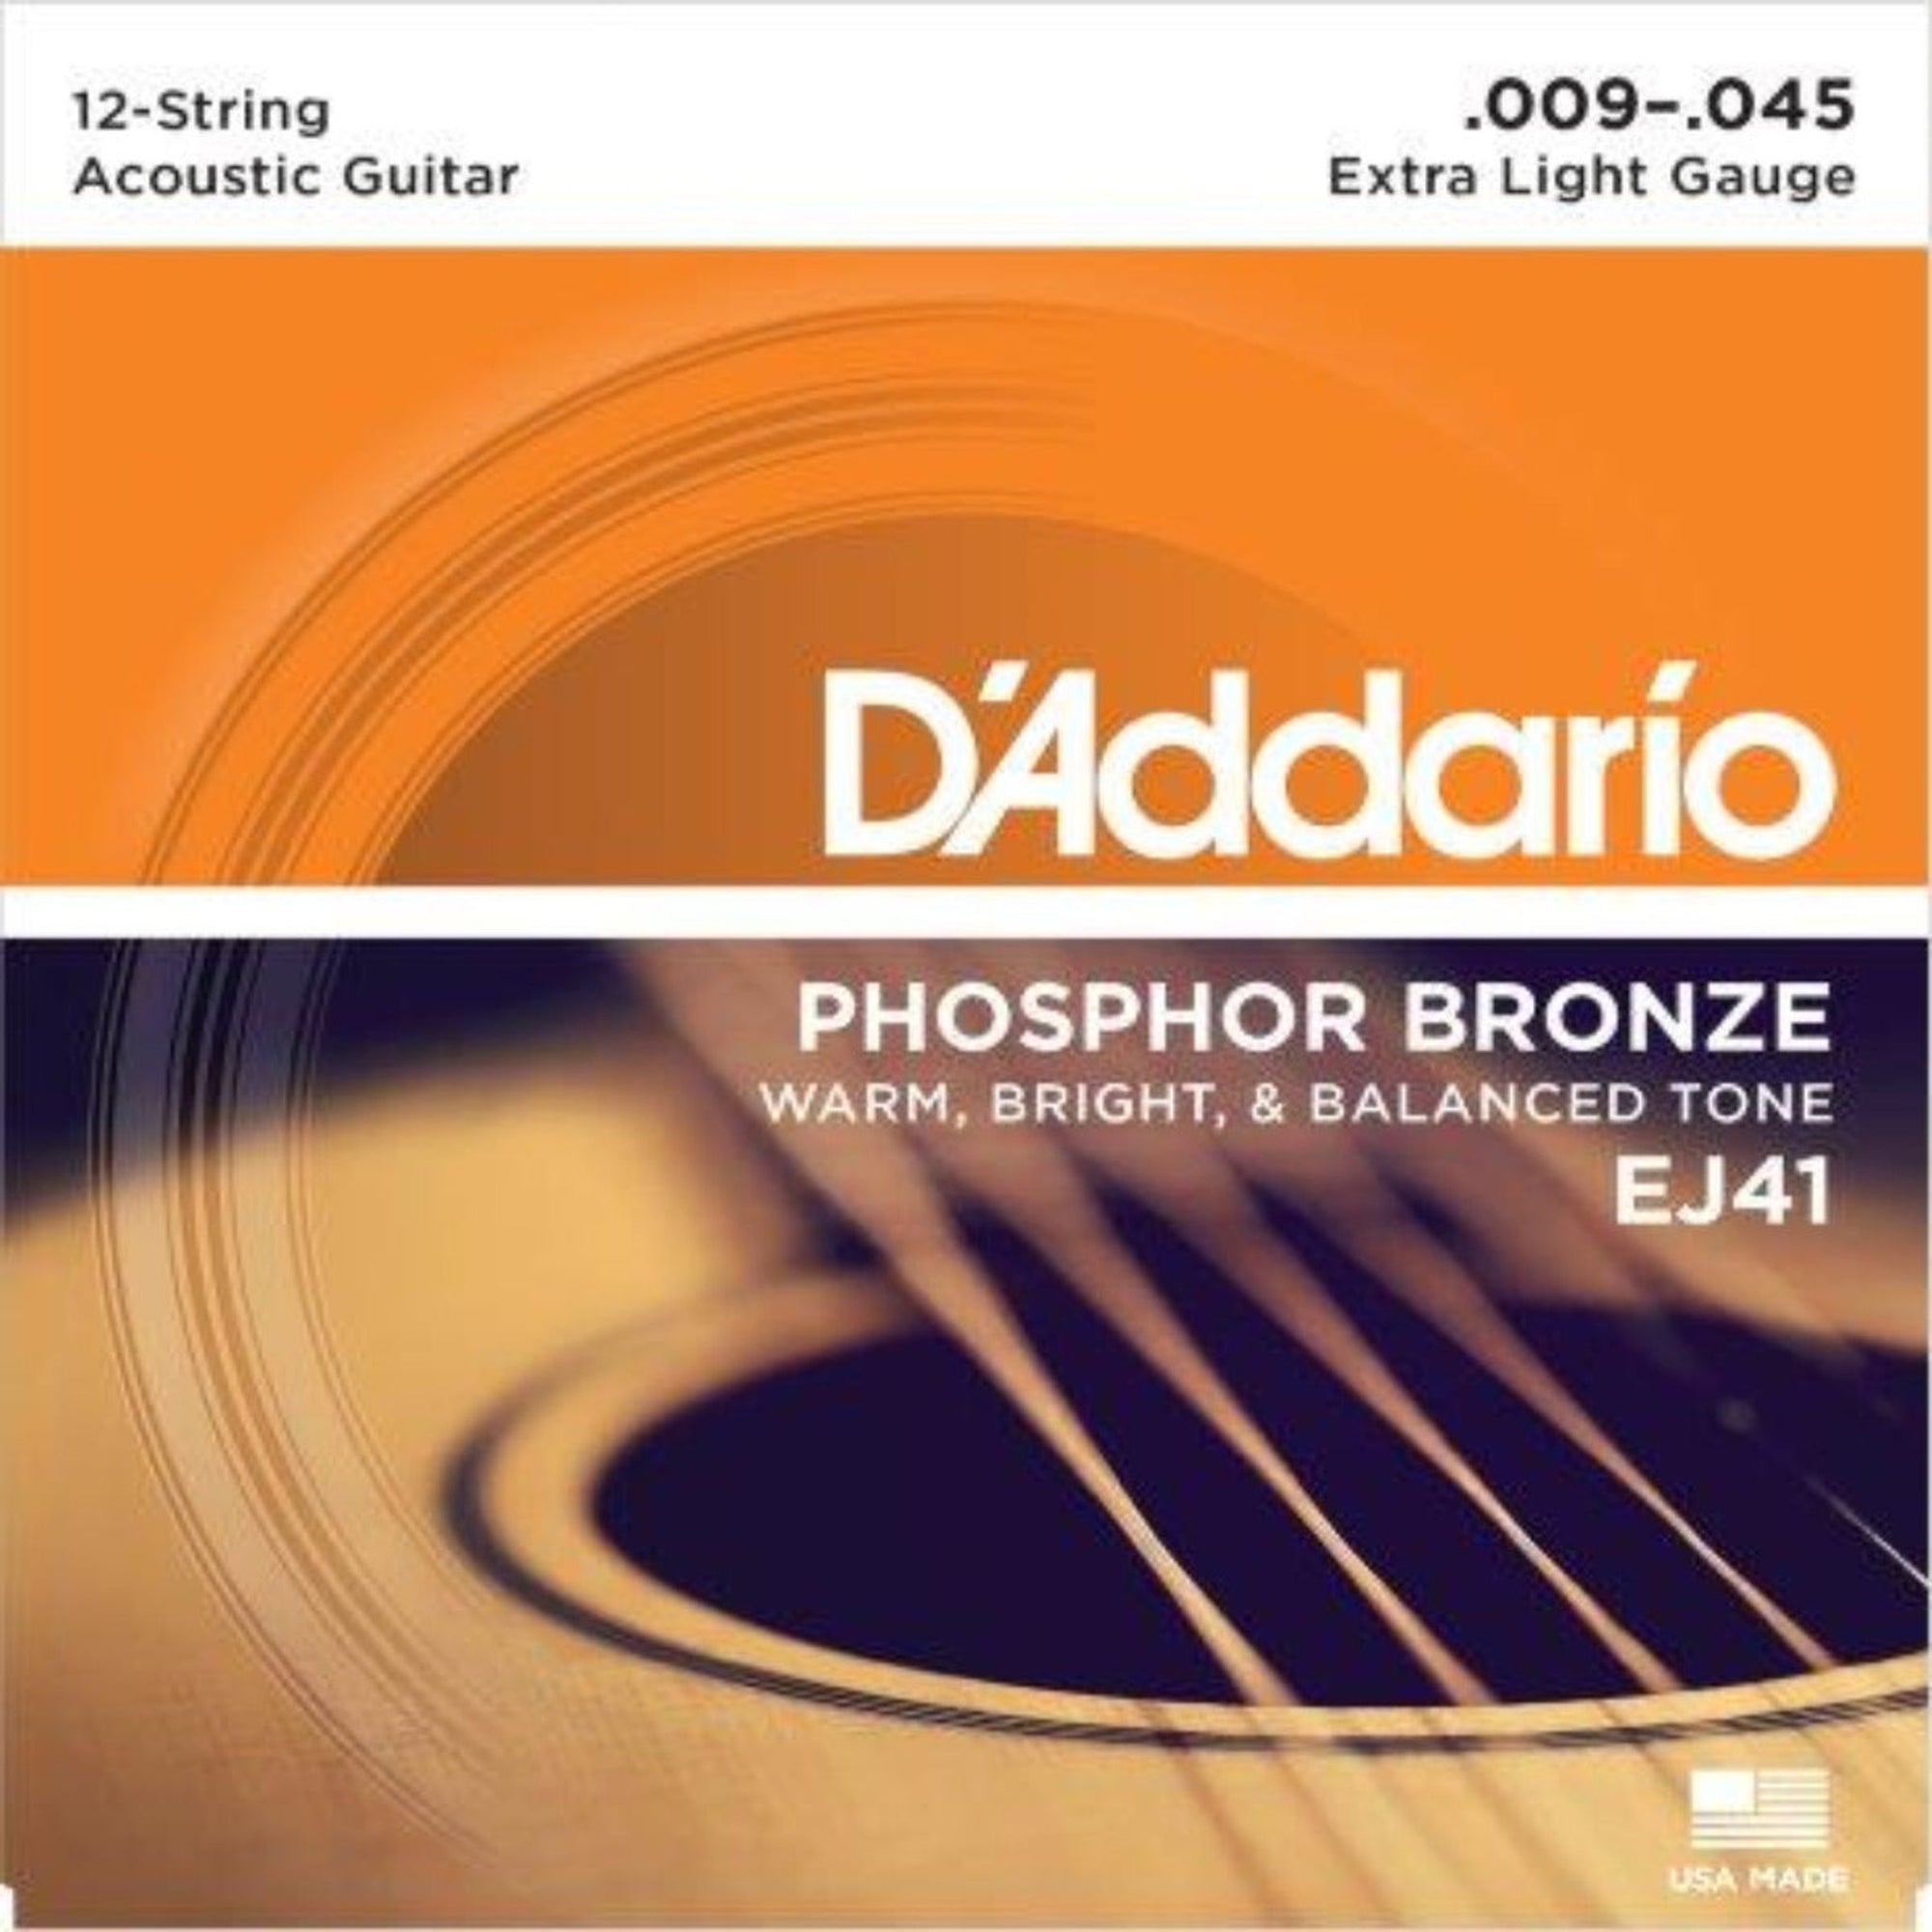 EJ41, D'Addario's lightest gauge 12-string acoustic guitar set provides easy playability while retaining adequate tone and projection for most playing situations. 